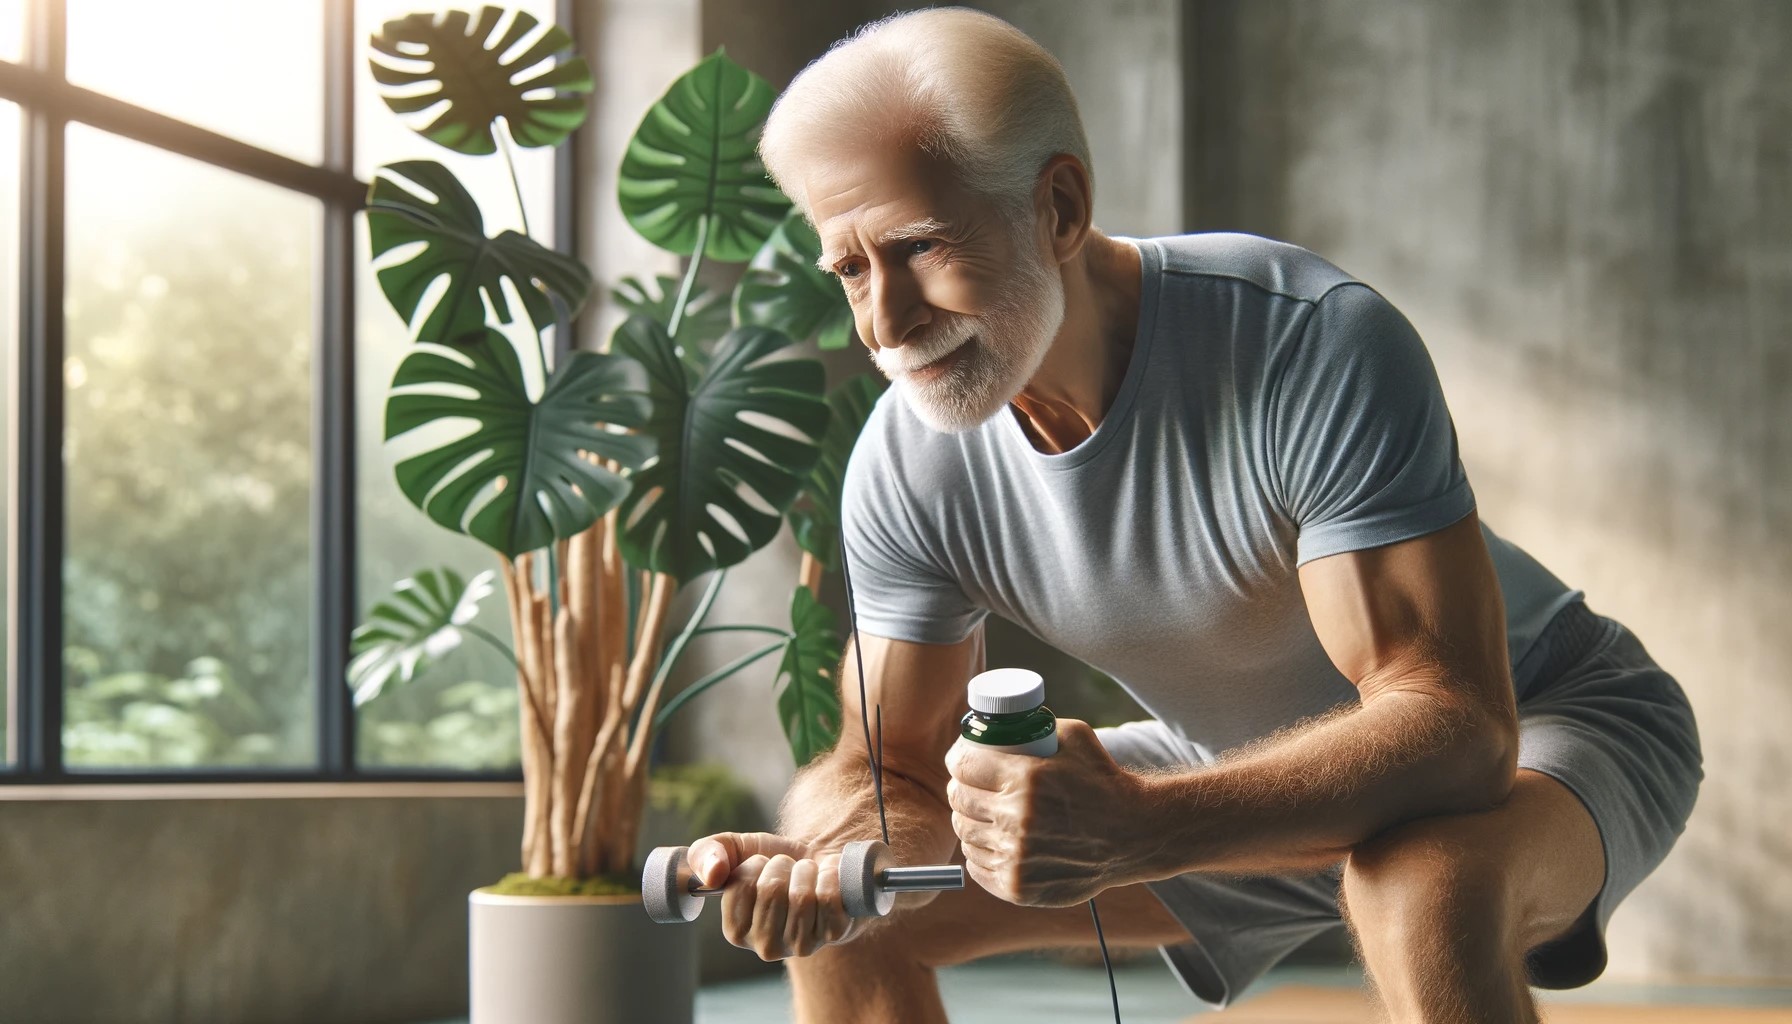 How to Increase Bone Density After 60